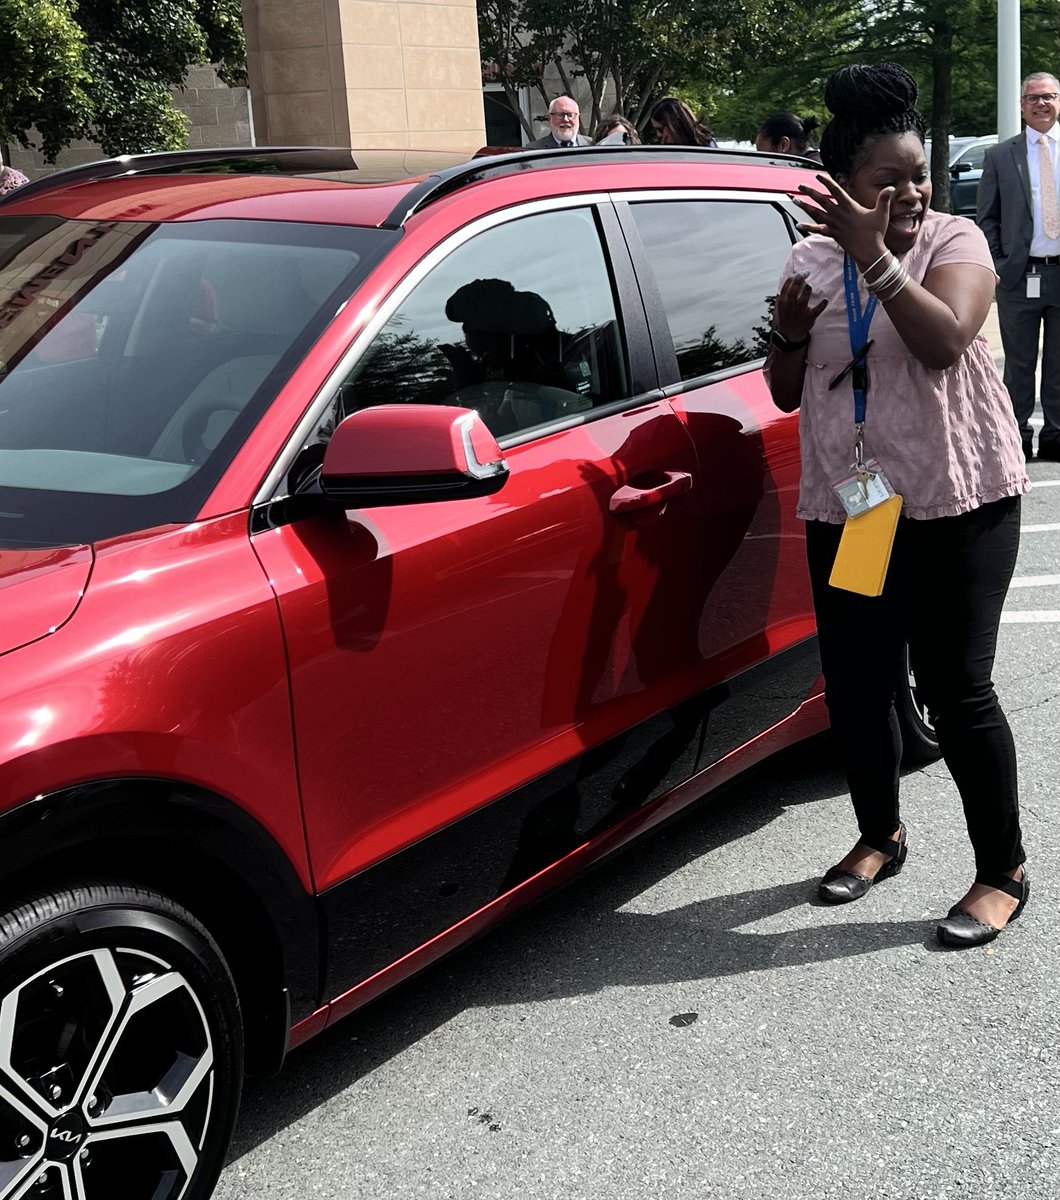 Thank you @UnionCountyKia for this amazing BRAND NEW CAR for @YarondaK from @RockRestESNC, the 2024 @UCPSNC Teacher of the Year! #TeamUCPS #BeTheBest @UCPSNCCareers 👏💯🚗